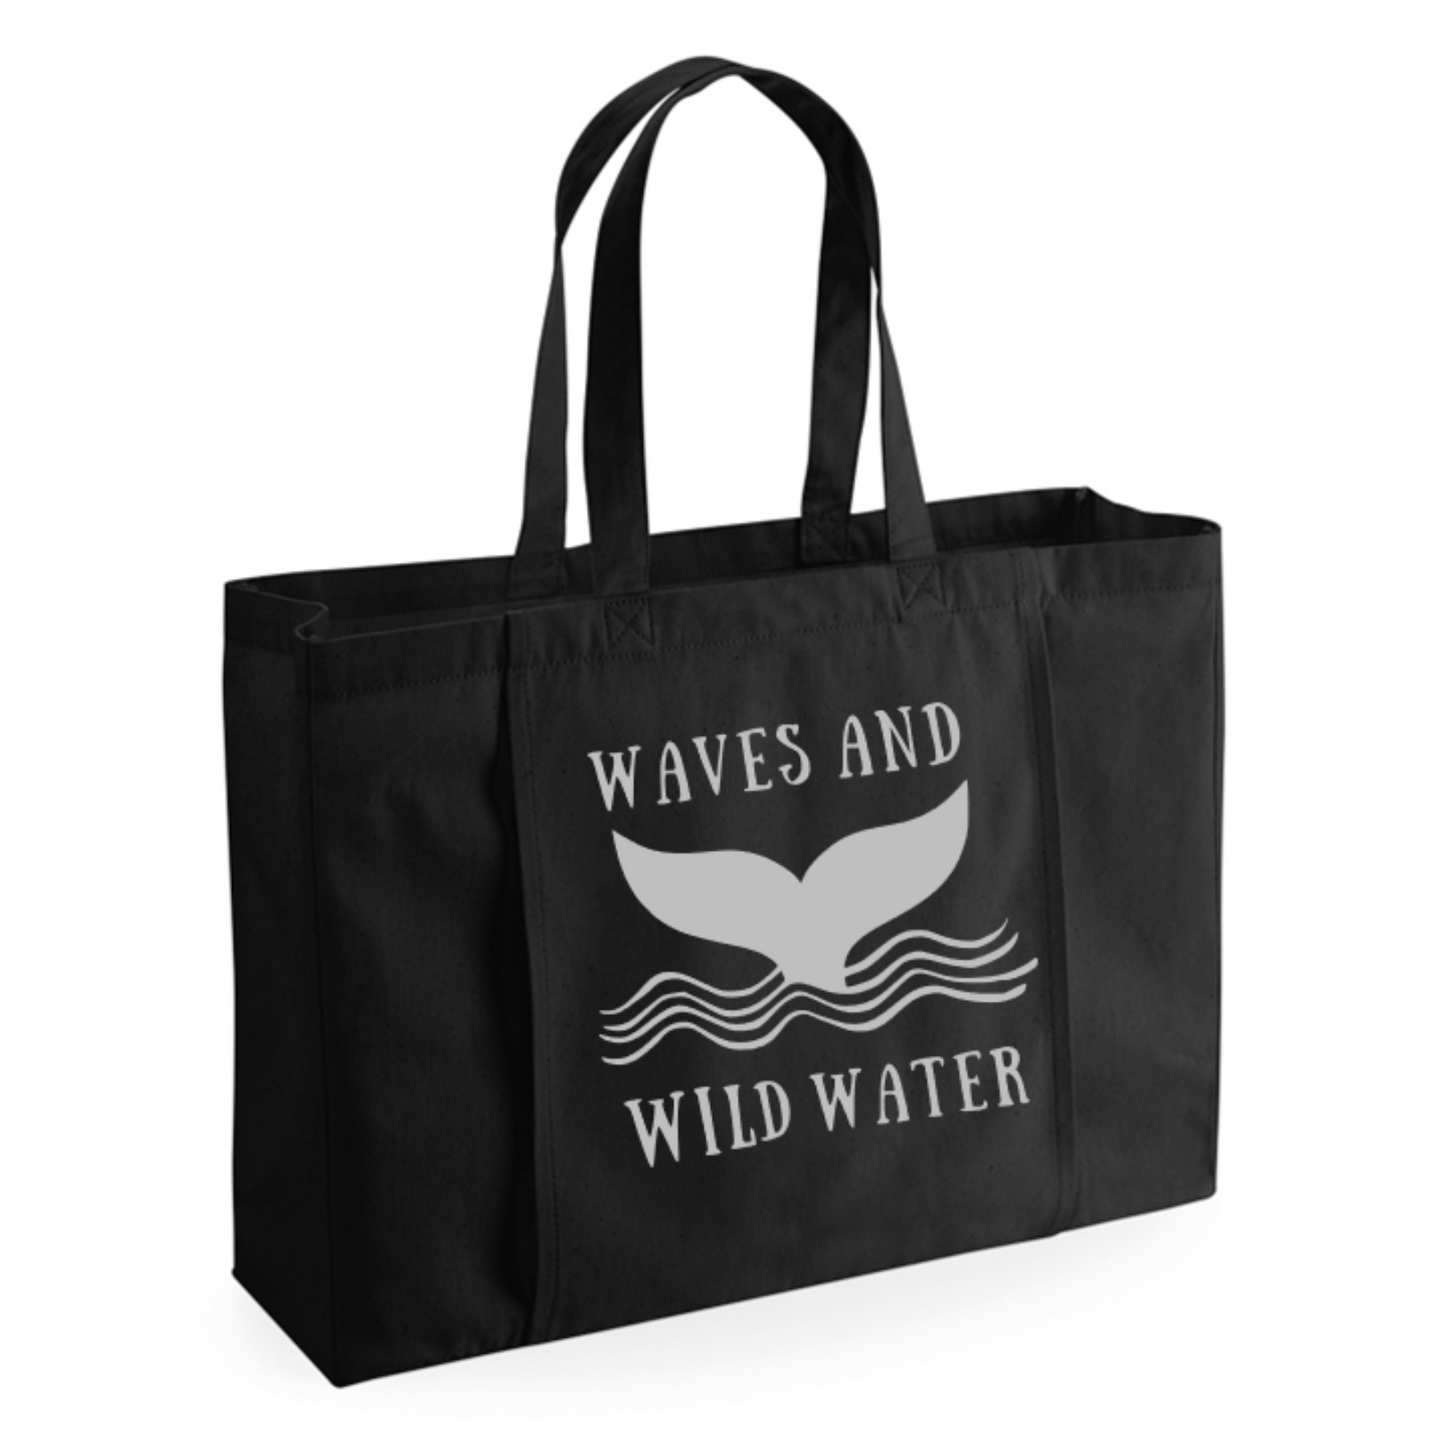 A black tote bag, with Waves & Wild Water logo on the front in silver.